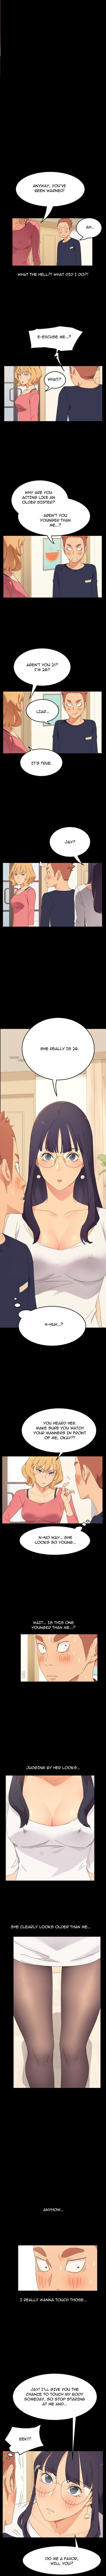 PERFECT ROOMMATES Ch. 1 [English] 4